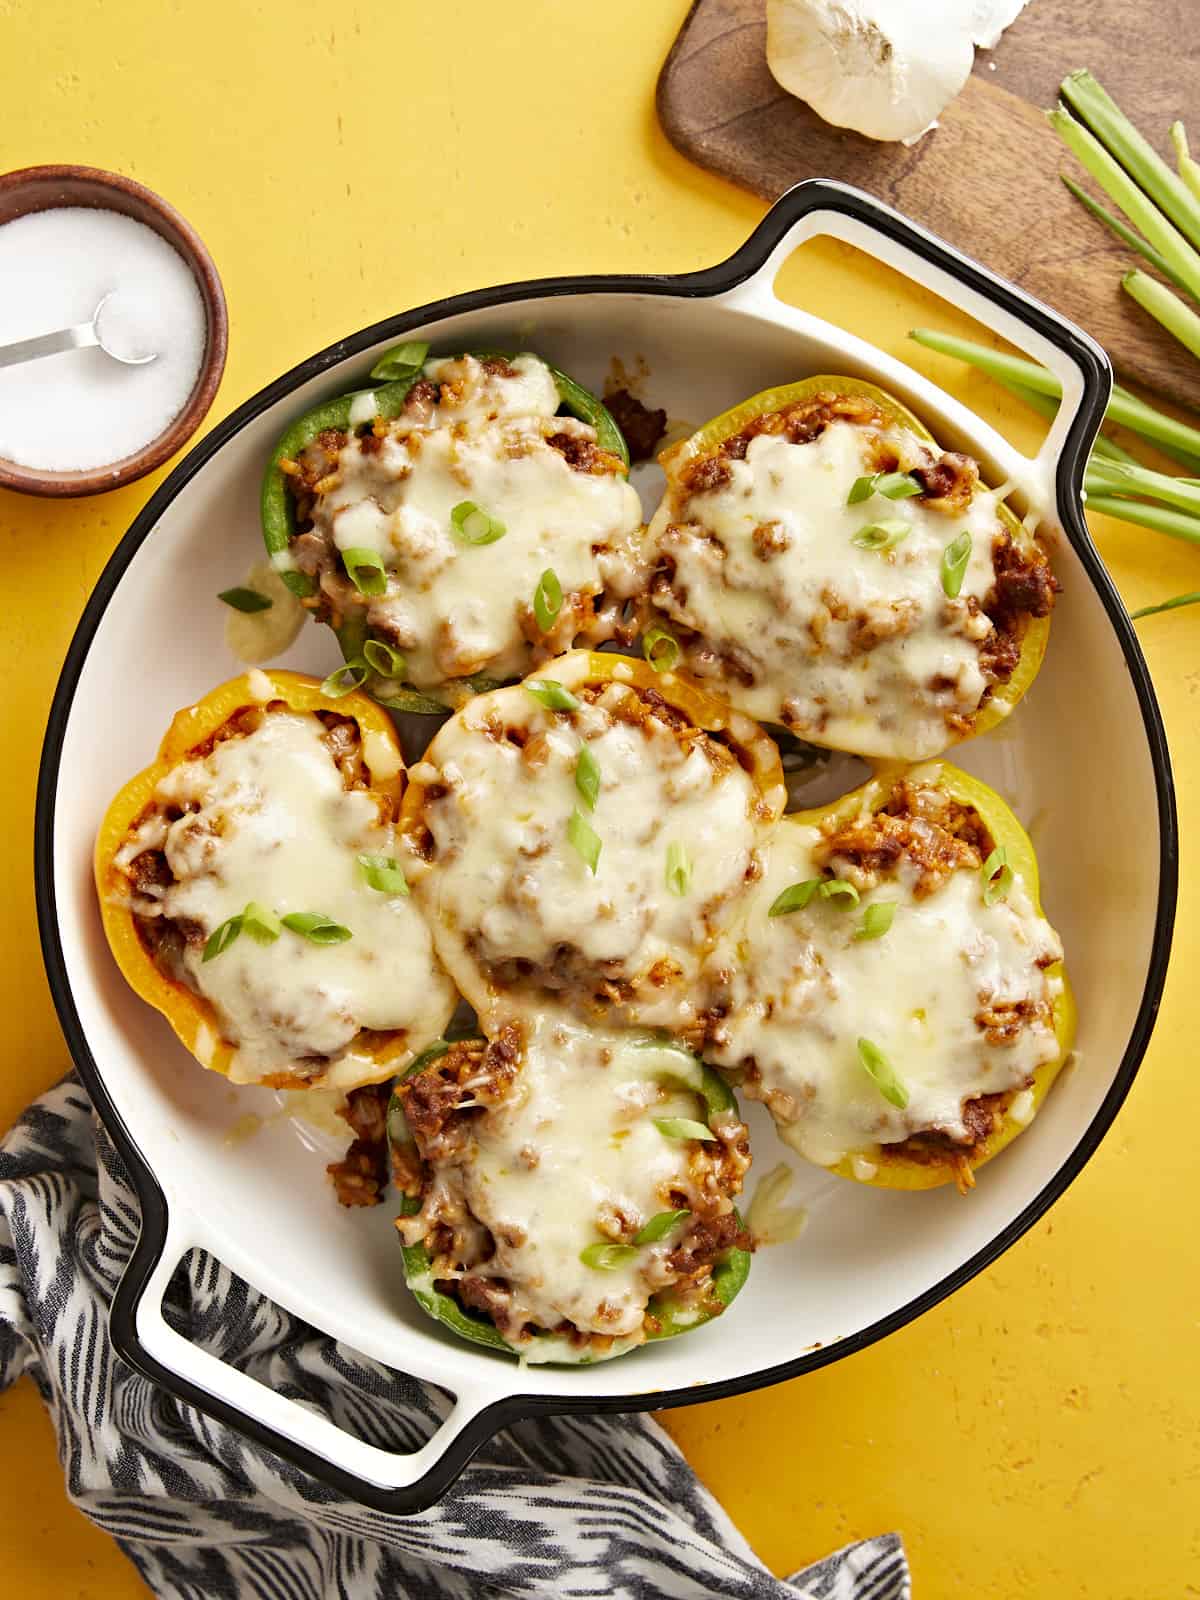 Overhead view of chorizo stuffed bell peppers in a baking dish on a yellow background.